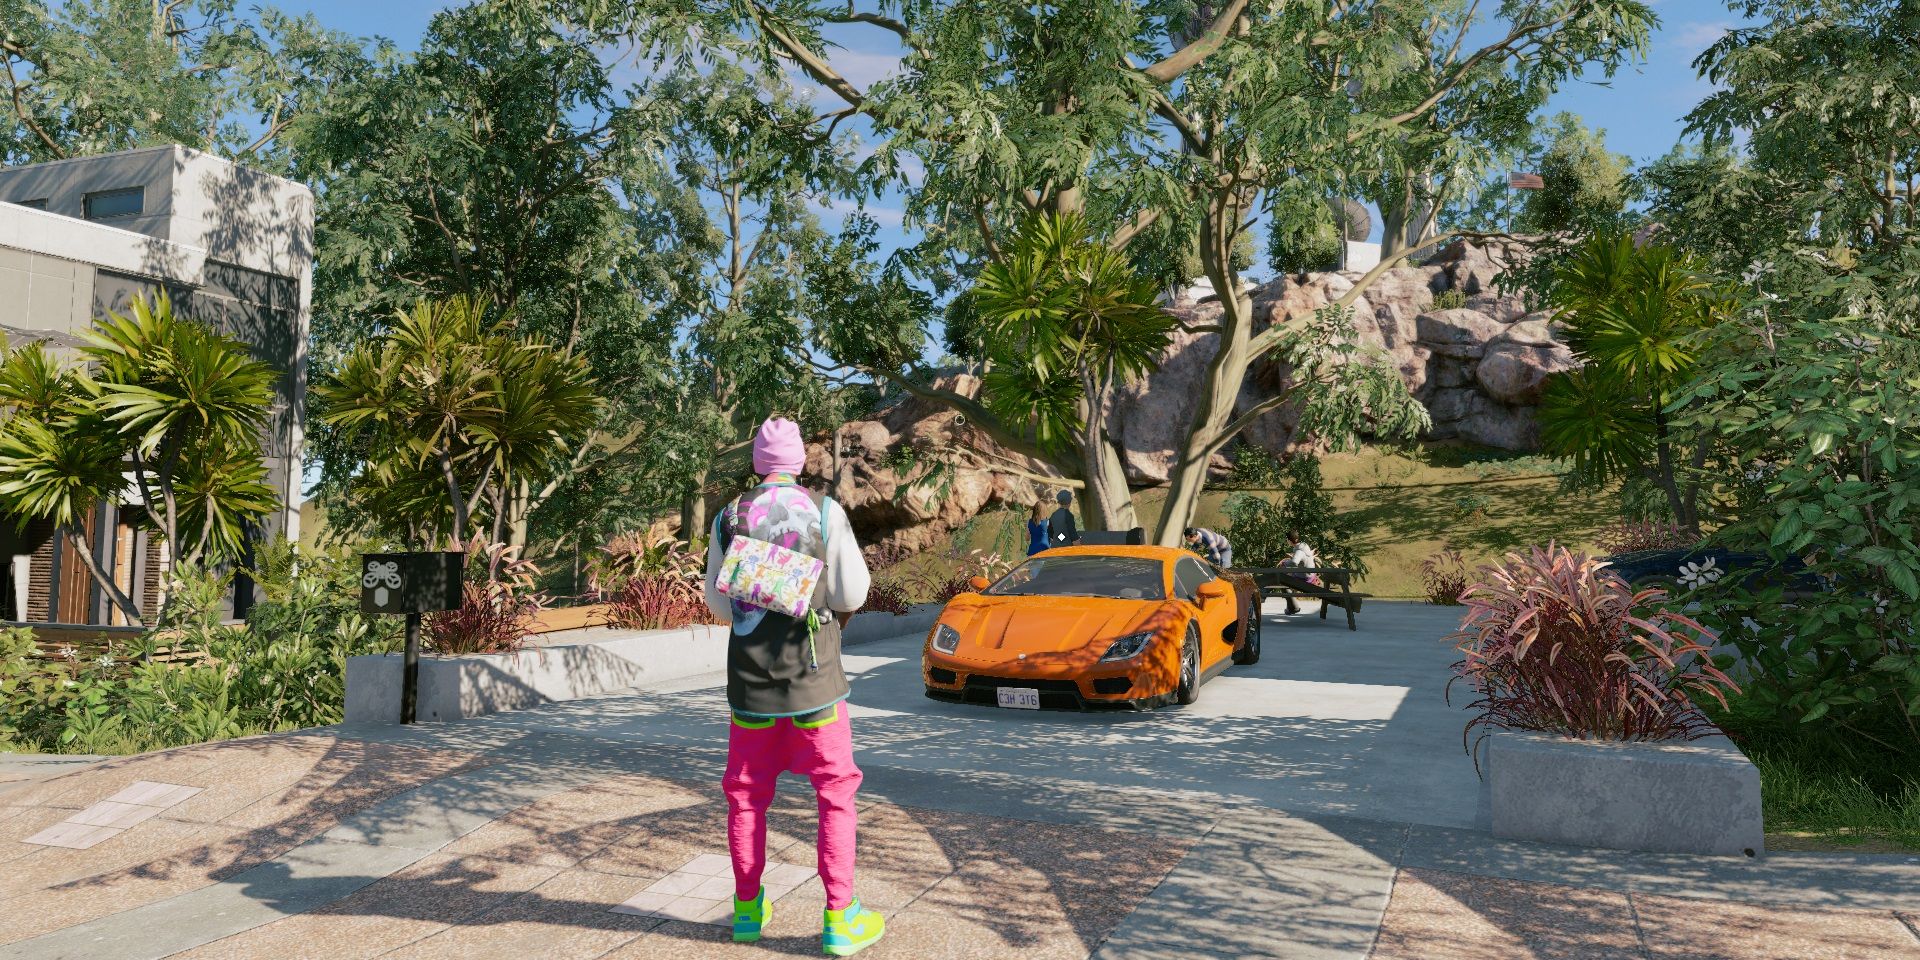 Watch Dogs 2 protagonist in pink outfit looking at a sports car with lots of trees in the background